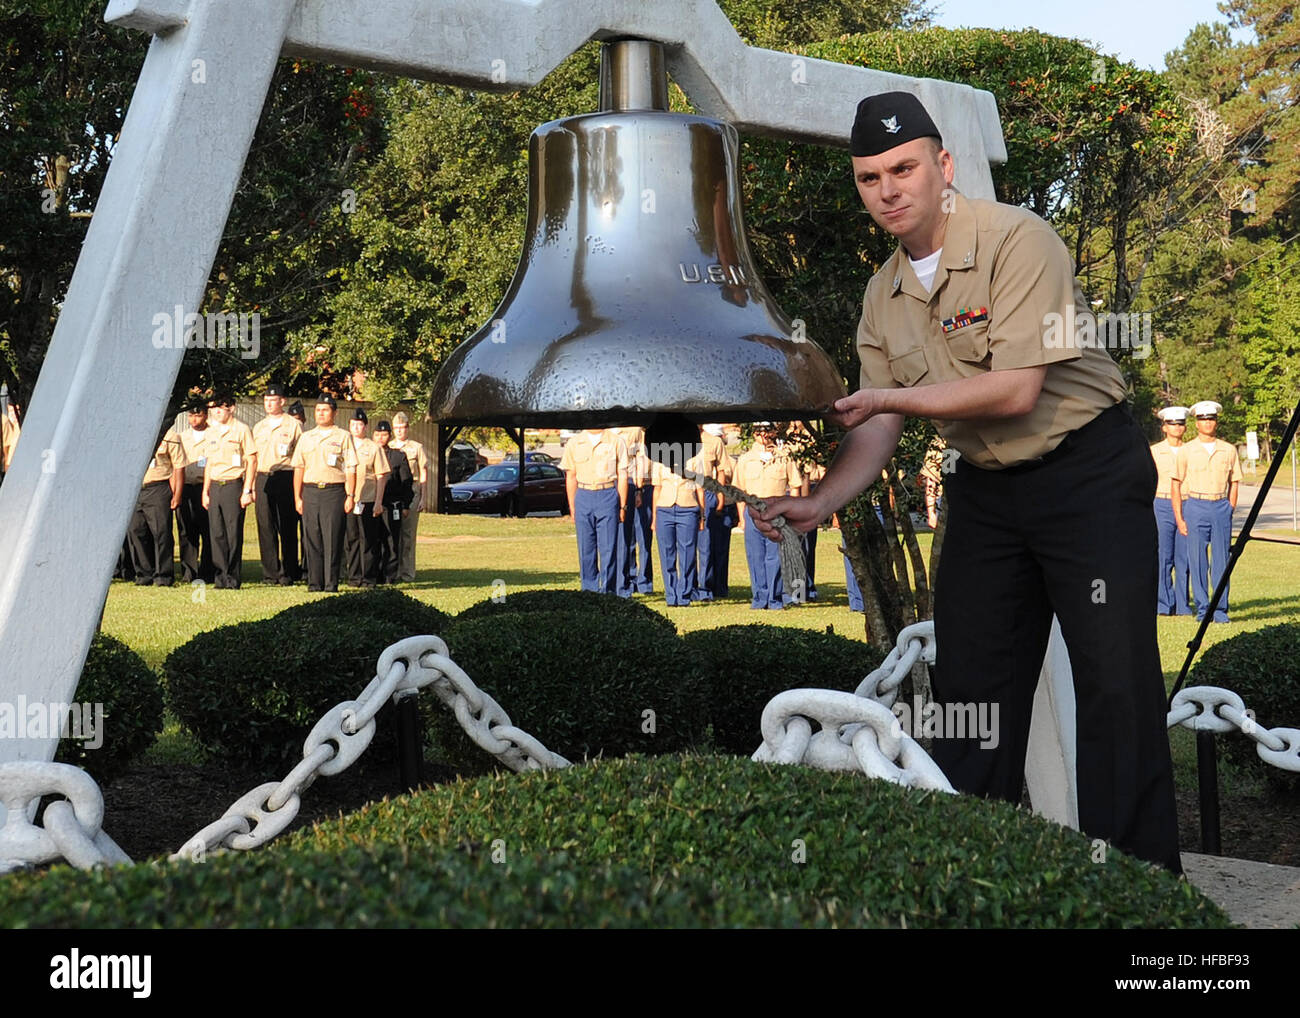 NAVAL AIR STATION MERIDIAN, Miss. (Oct. 12, 2012) Aviation Boatswain's Mate (Handling) 3rd Class David Neiman rings the bell of the attack cargo ship USS Yancey (AKA-93) in honor of the Navy's 237th birthday. The bell ringing serves as a reminder of history, heritage and accomplishments of the naval service, and it is an enduring tradition of the Navy birthday celebration. The U.S. Navy has a 237-year heritage of defending freedom and projecting and protecting U.S. interests around the globe. Join the conversation on social media using #warfighting. (U.S. Navy photo by Mass Communication Speci Stock Photo